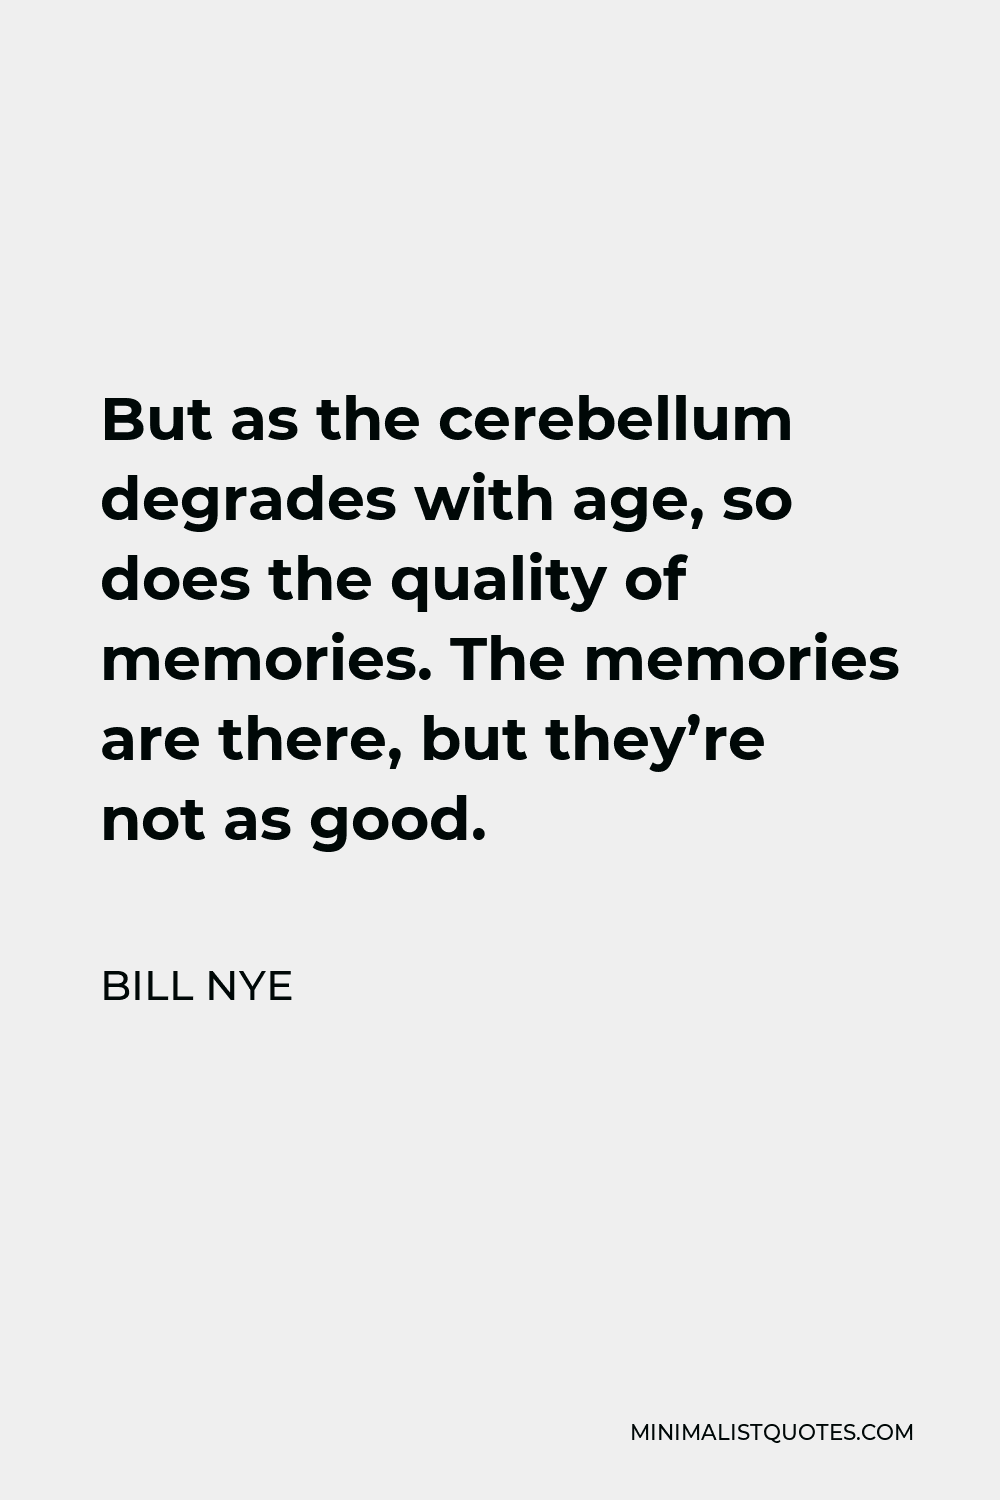 Bill Nye Quote - But as the cerebellum degrades with age, so does the quality of memories. The memories are there, but they’re not as good.